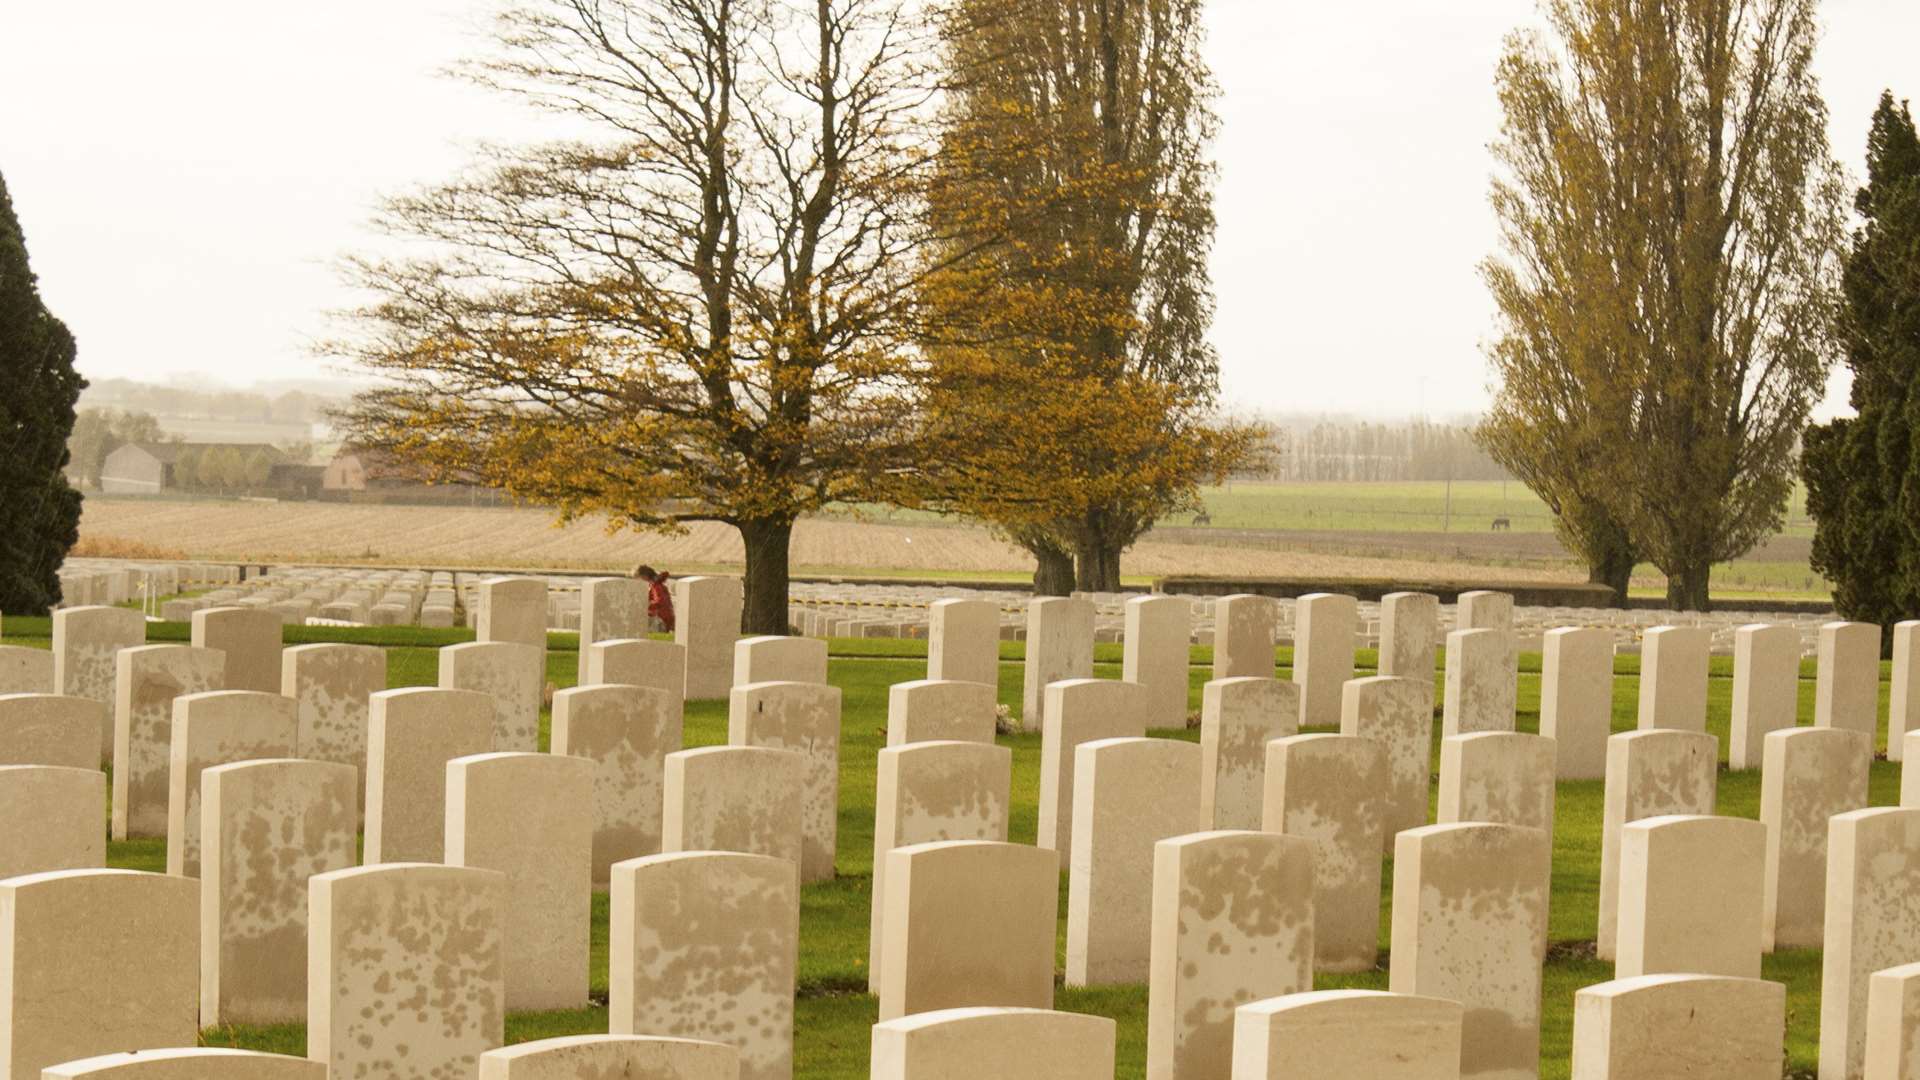 Tyne Cot cemetery, where many of those who lost their lives in Passchendaele are buried.